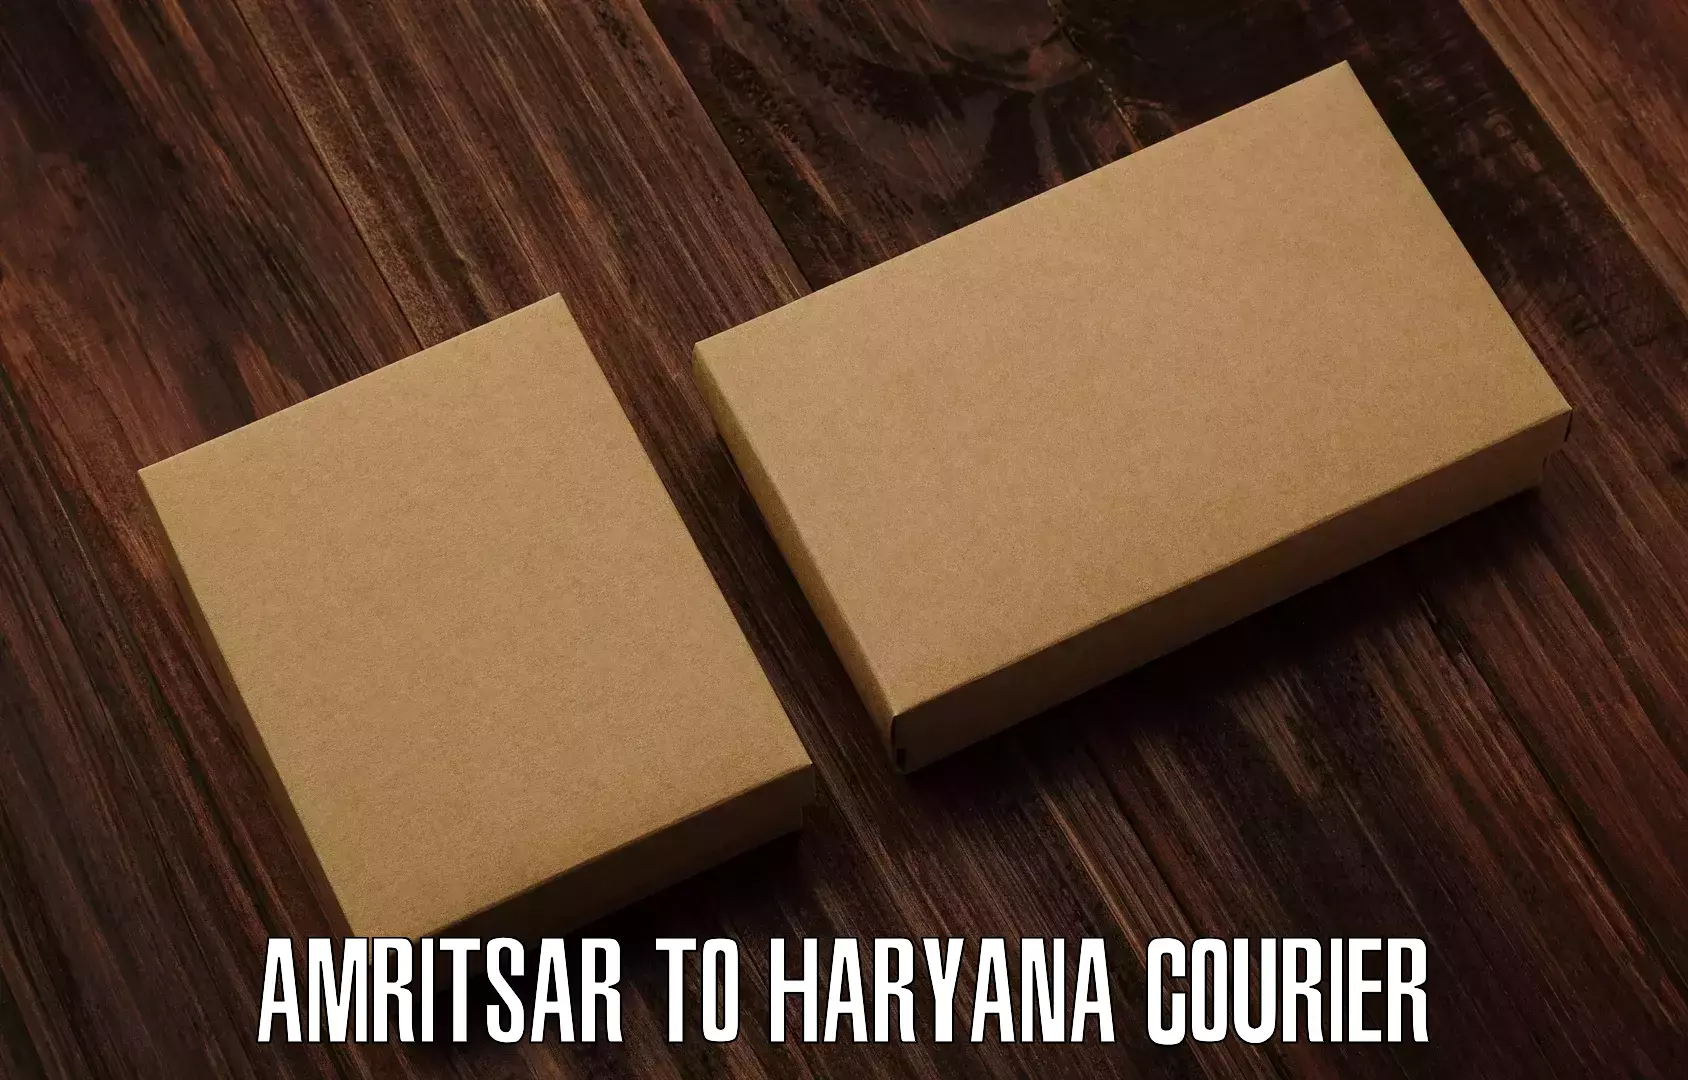 Full-service courier options Amritsar to Palwal